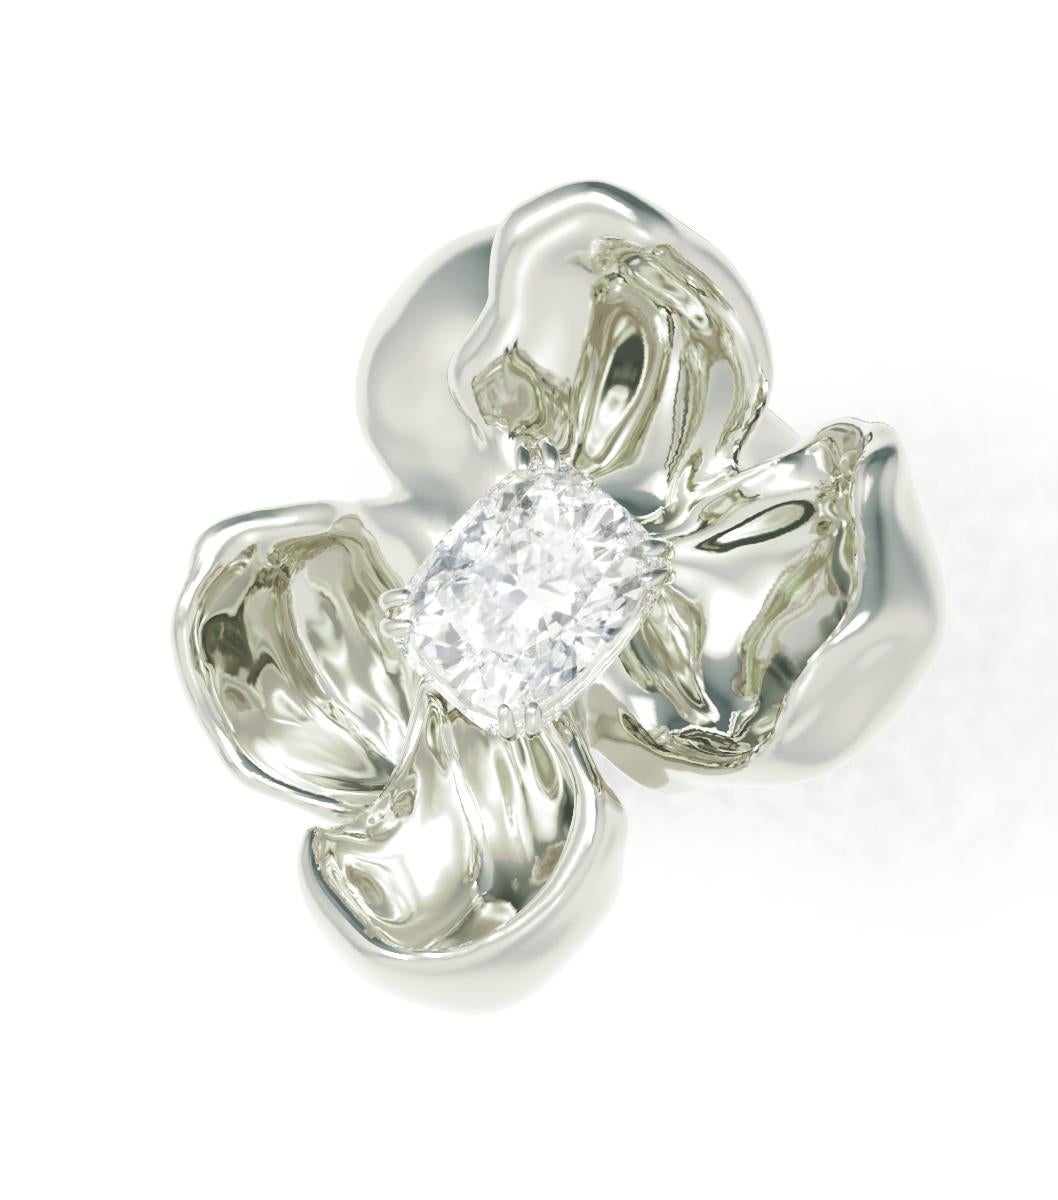 This limited edition Magnolia engagement ring is adorned with a stunning cushion diamond. The weight is 8.59 grams. The flower is larger and heavier than it appears in the photo, and the white gold is exceptionally shiny due to the size and shape of